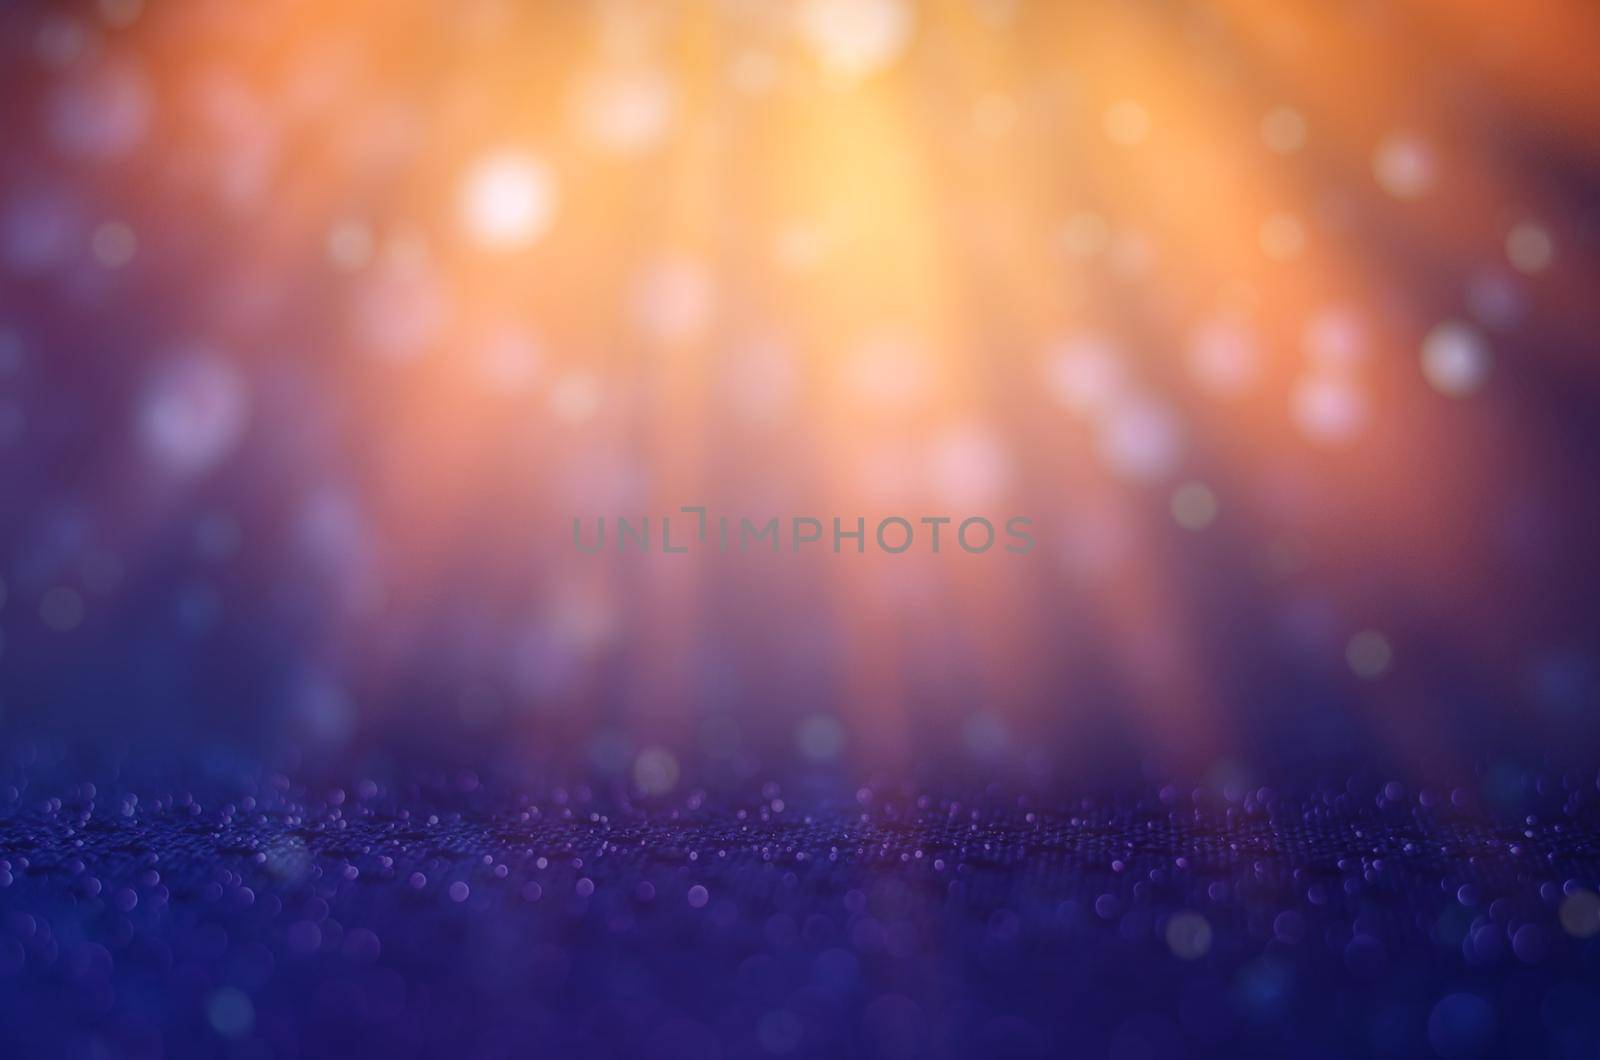 The background is blue, orange and light shines down to celebrate.